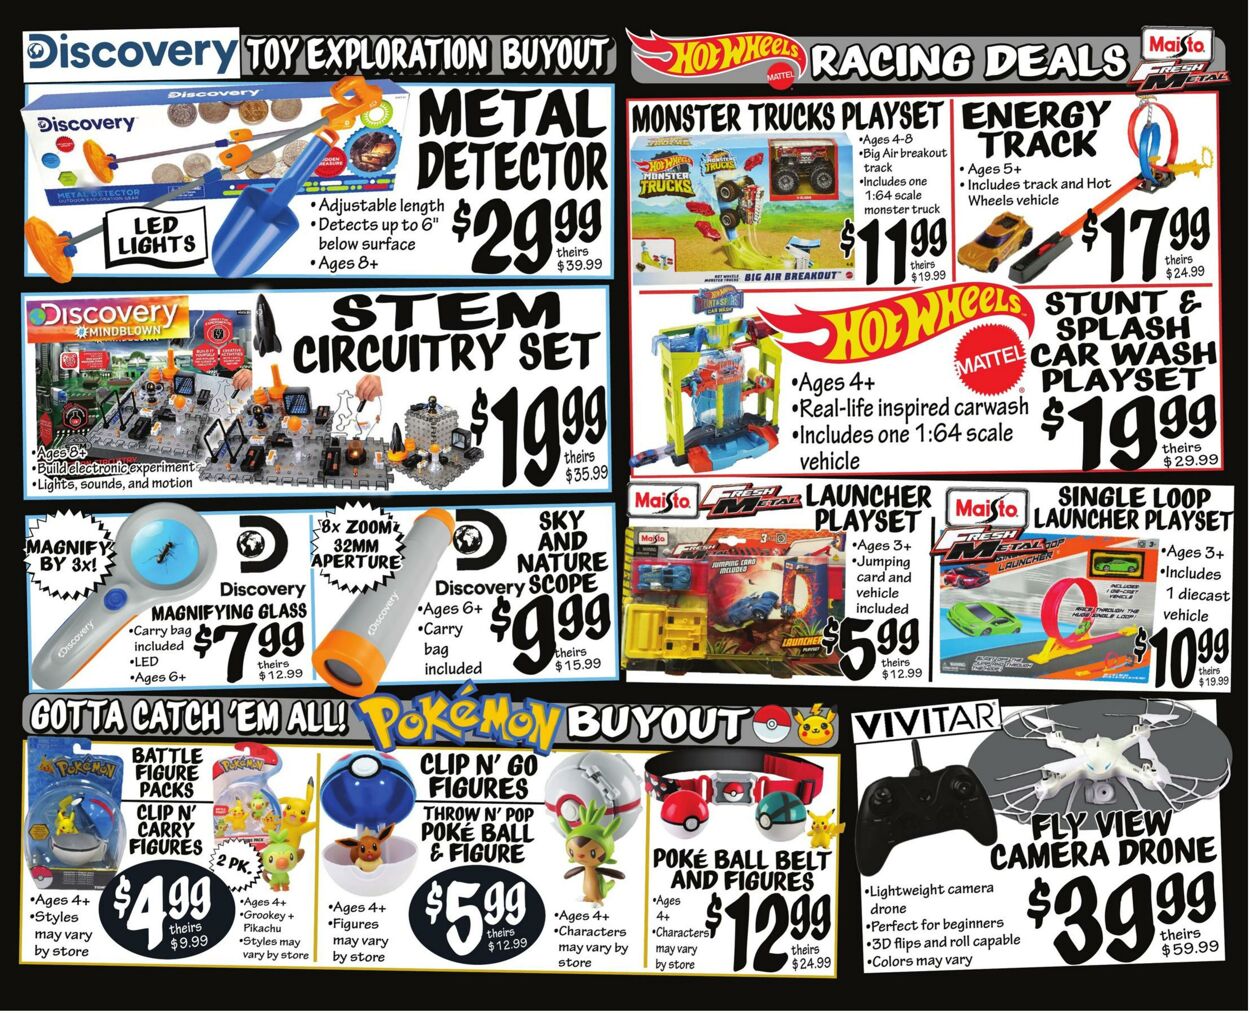 Weekly ad Ollie's 11/10/2022 - 11/16/2022